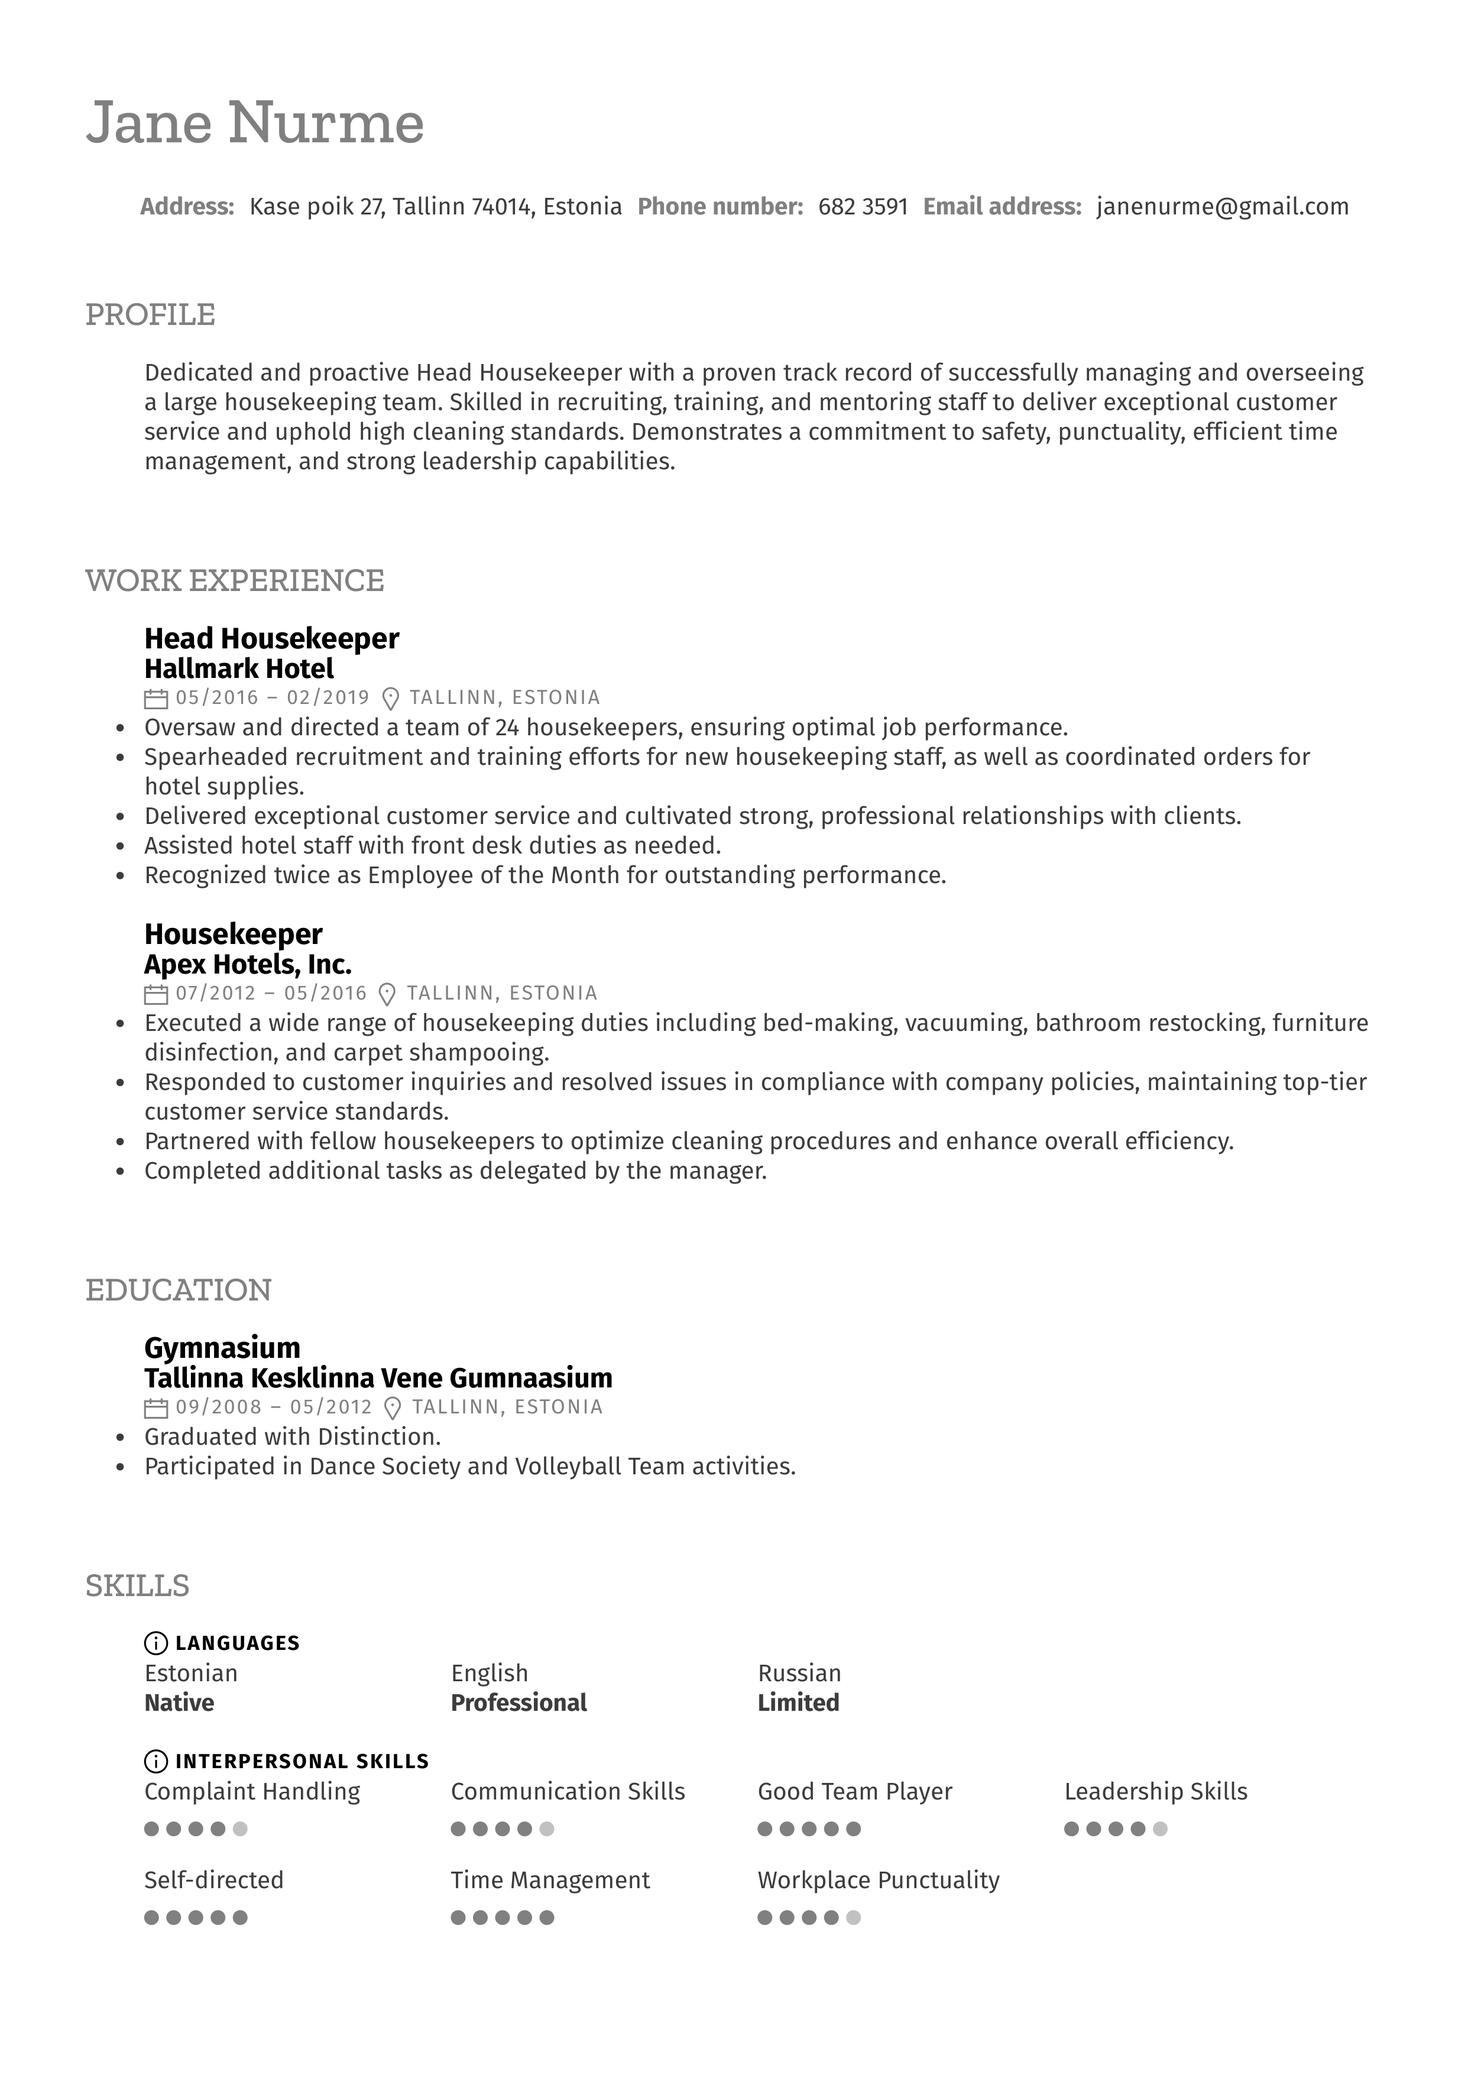 DTDC Business Analyst Resume Template